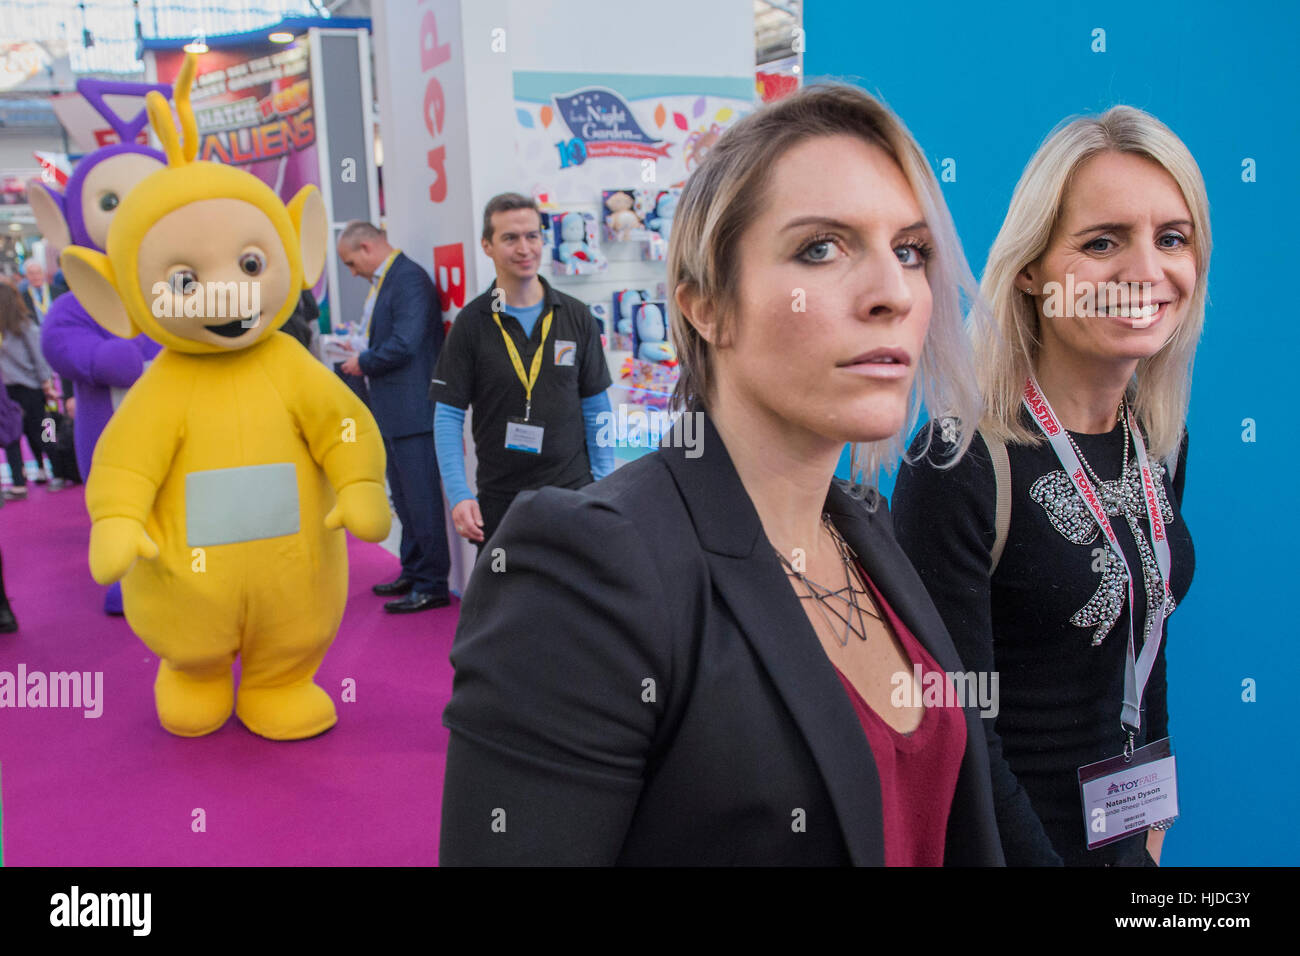 London, UK. 24th Jan, 2017. The Teletubbies celebrate their 20th anniversary - The London Toy Fair opens at Olympia exhibition centre. Organised by the British Toy and Hobby Association it is the only dedicated toy, game and hobby trade exhibition in the UK. It runs for three days, with more than 240 exhibiting companies ranging from the large internationals to the new start up companies. London 24/01/17 Credit: Guy Bell/Alamy Live News Stock Photo